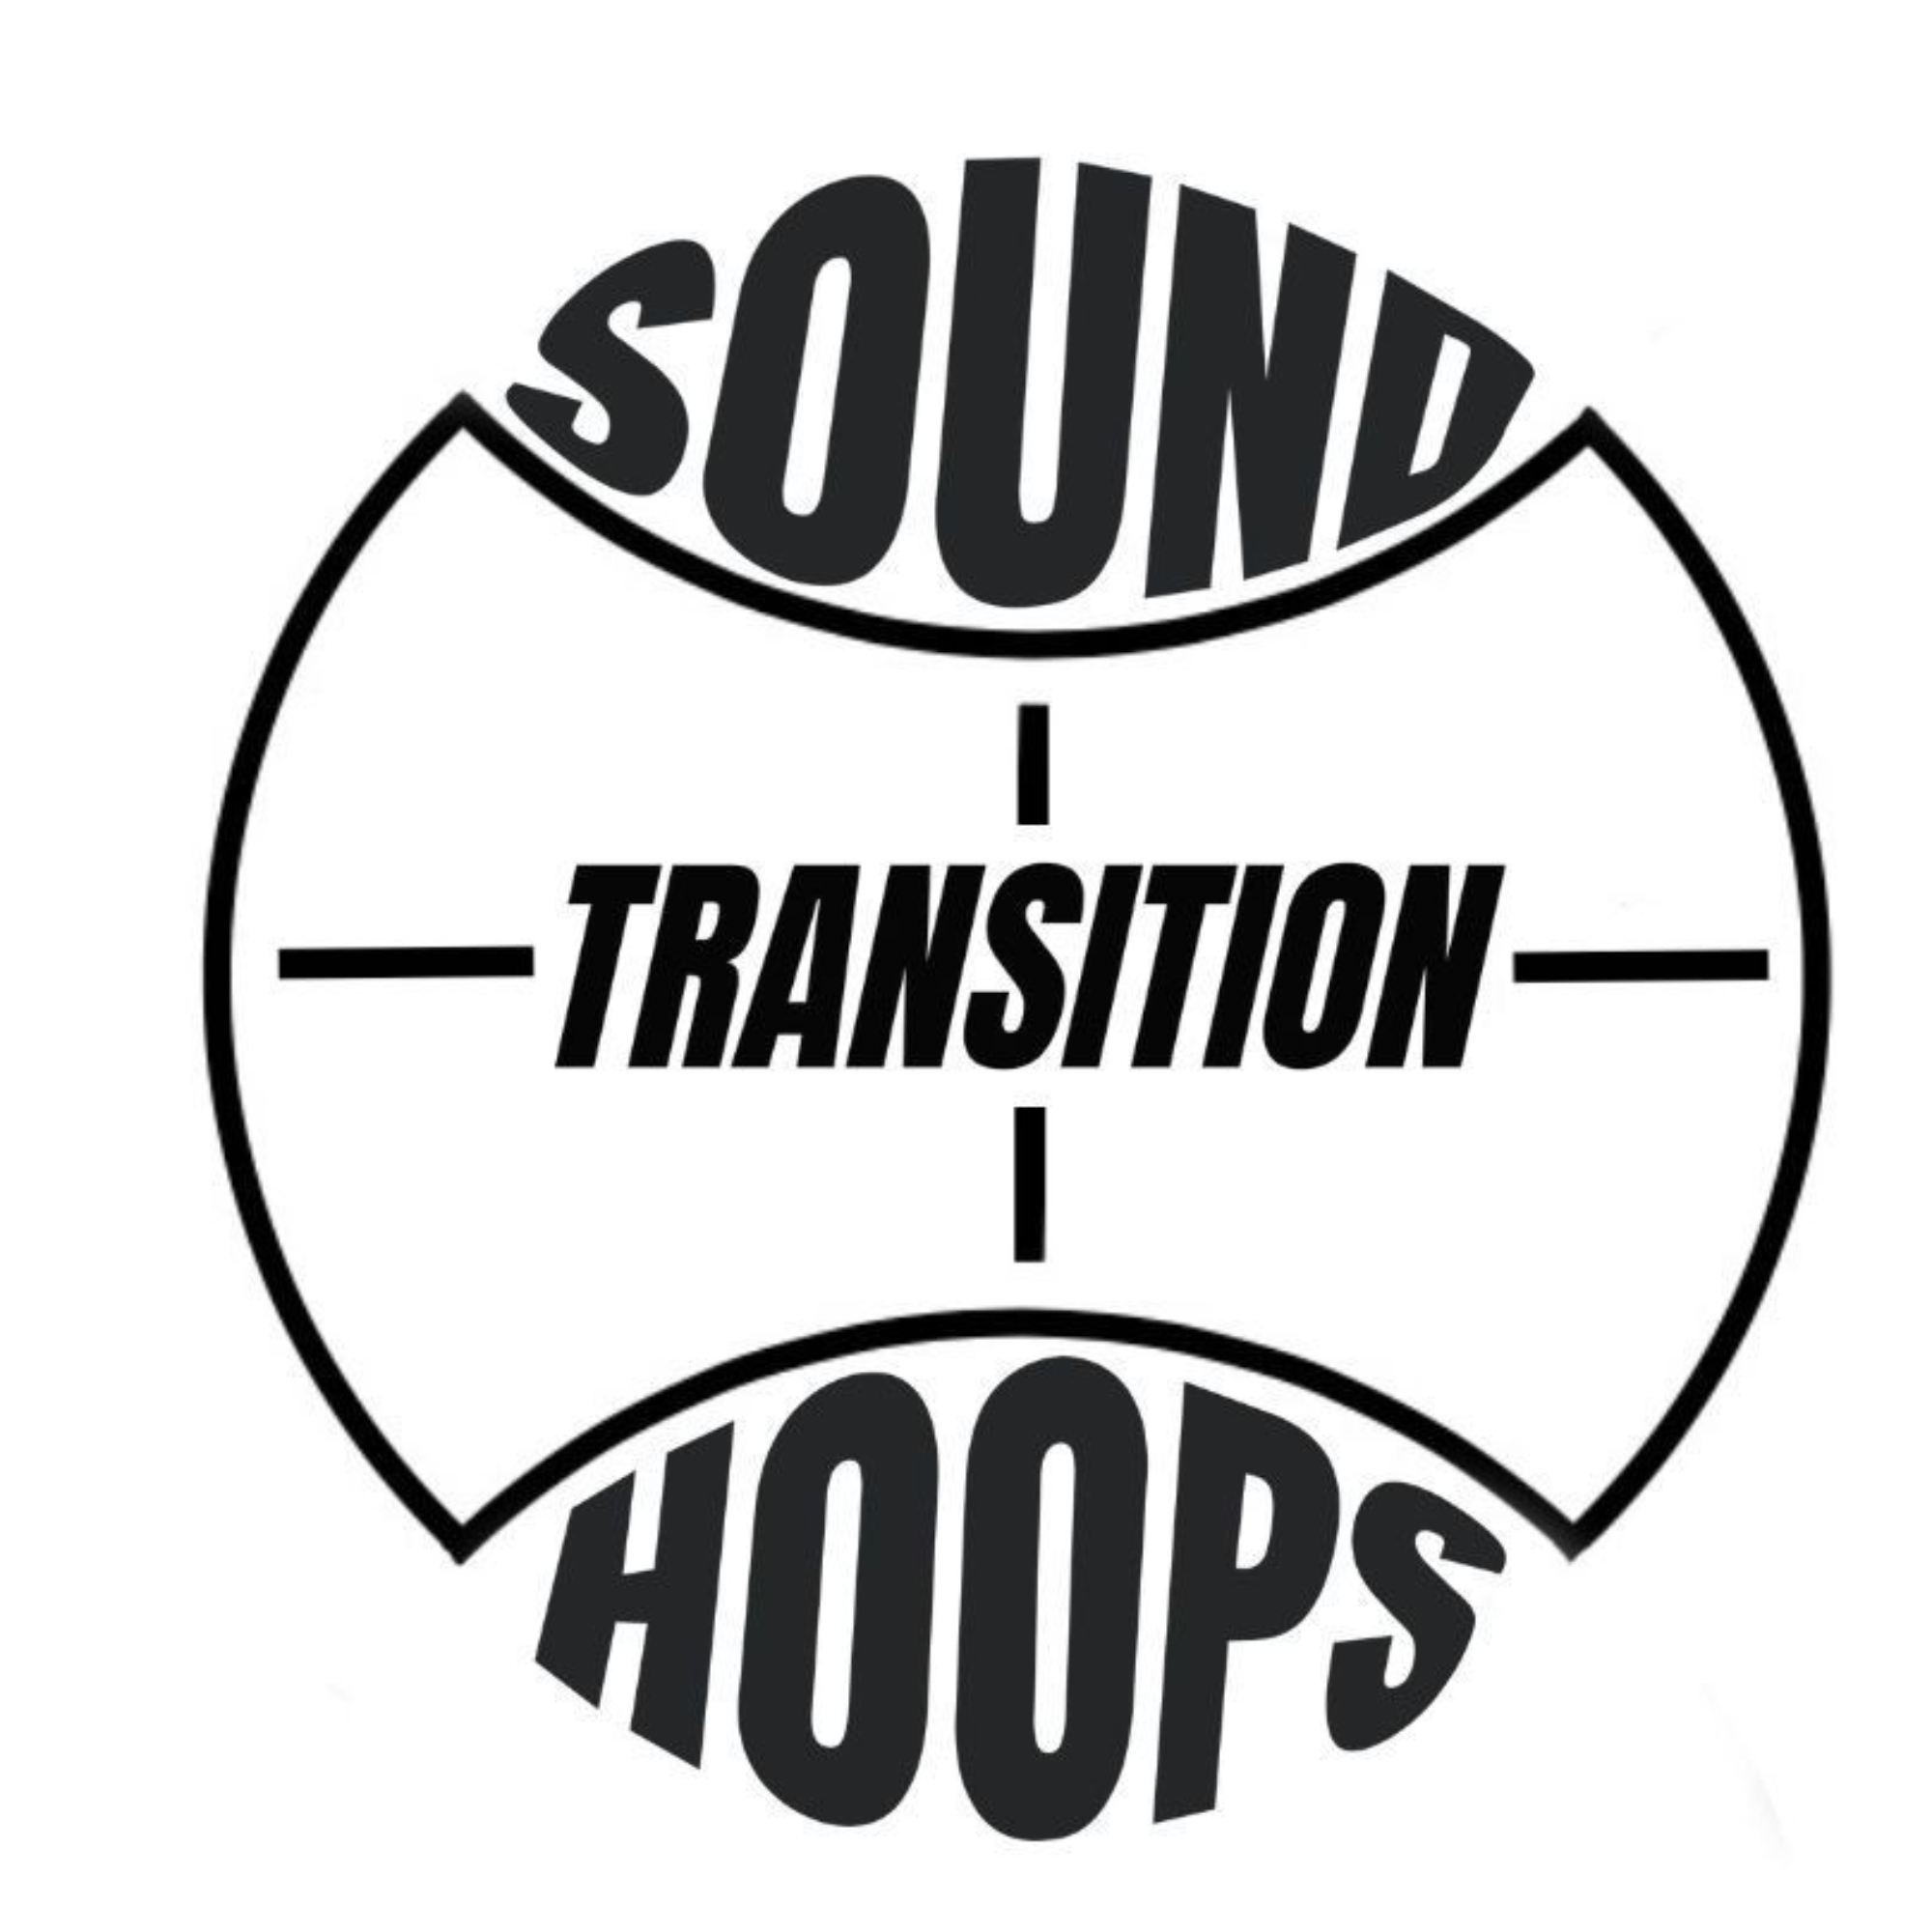 The official logo of Sound Transition Hoops